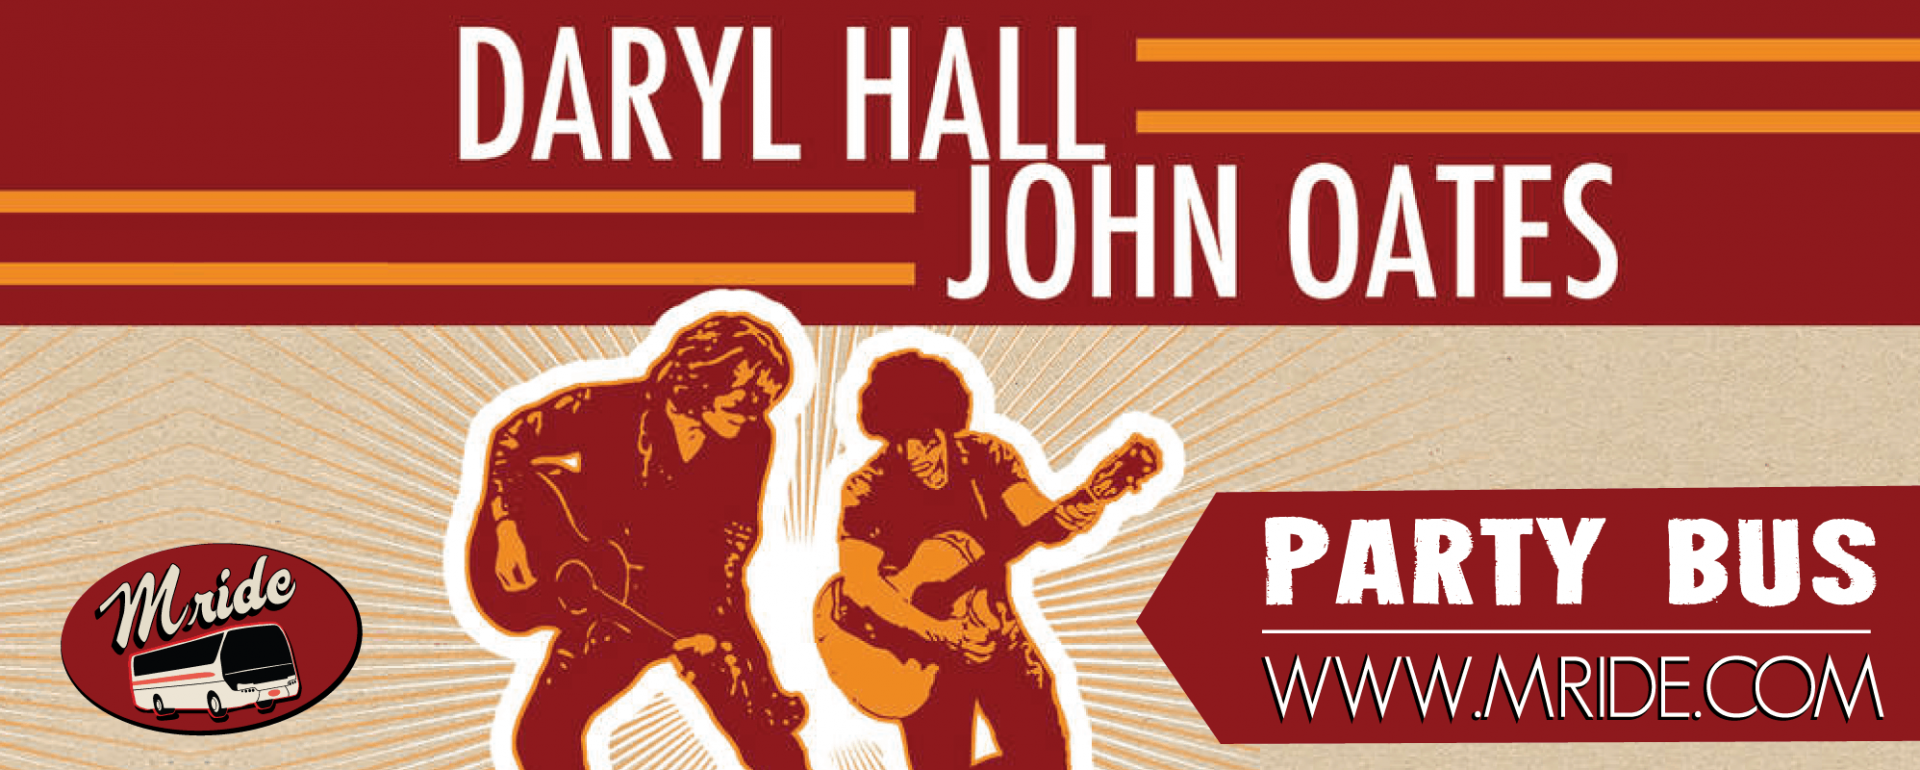 Hall and Oates Party Bus